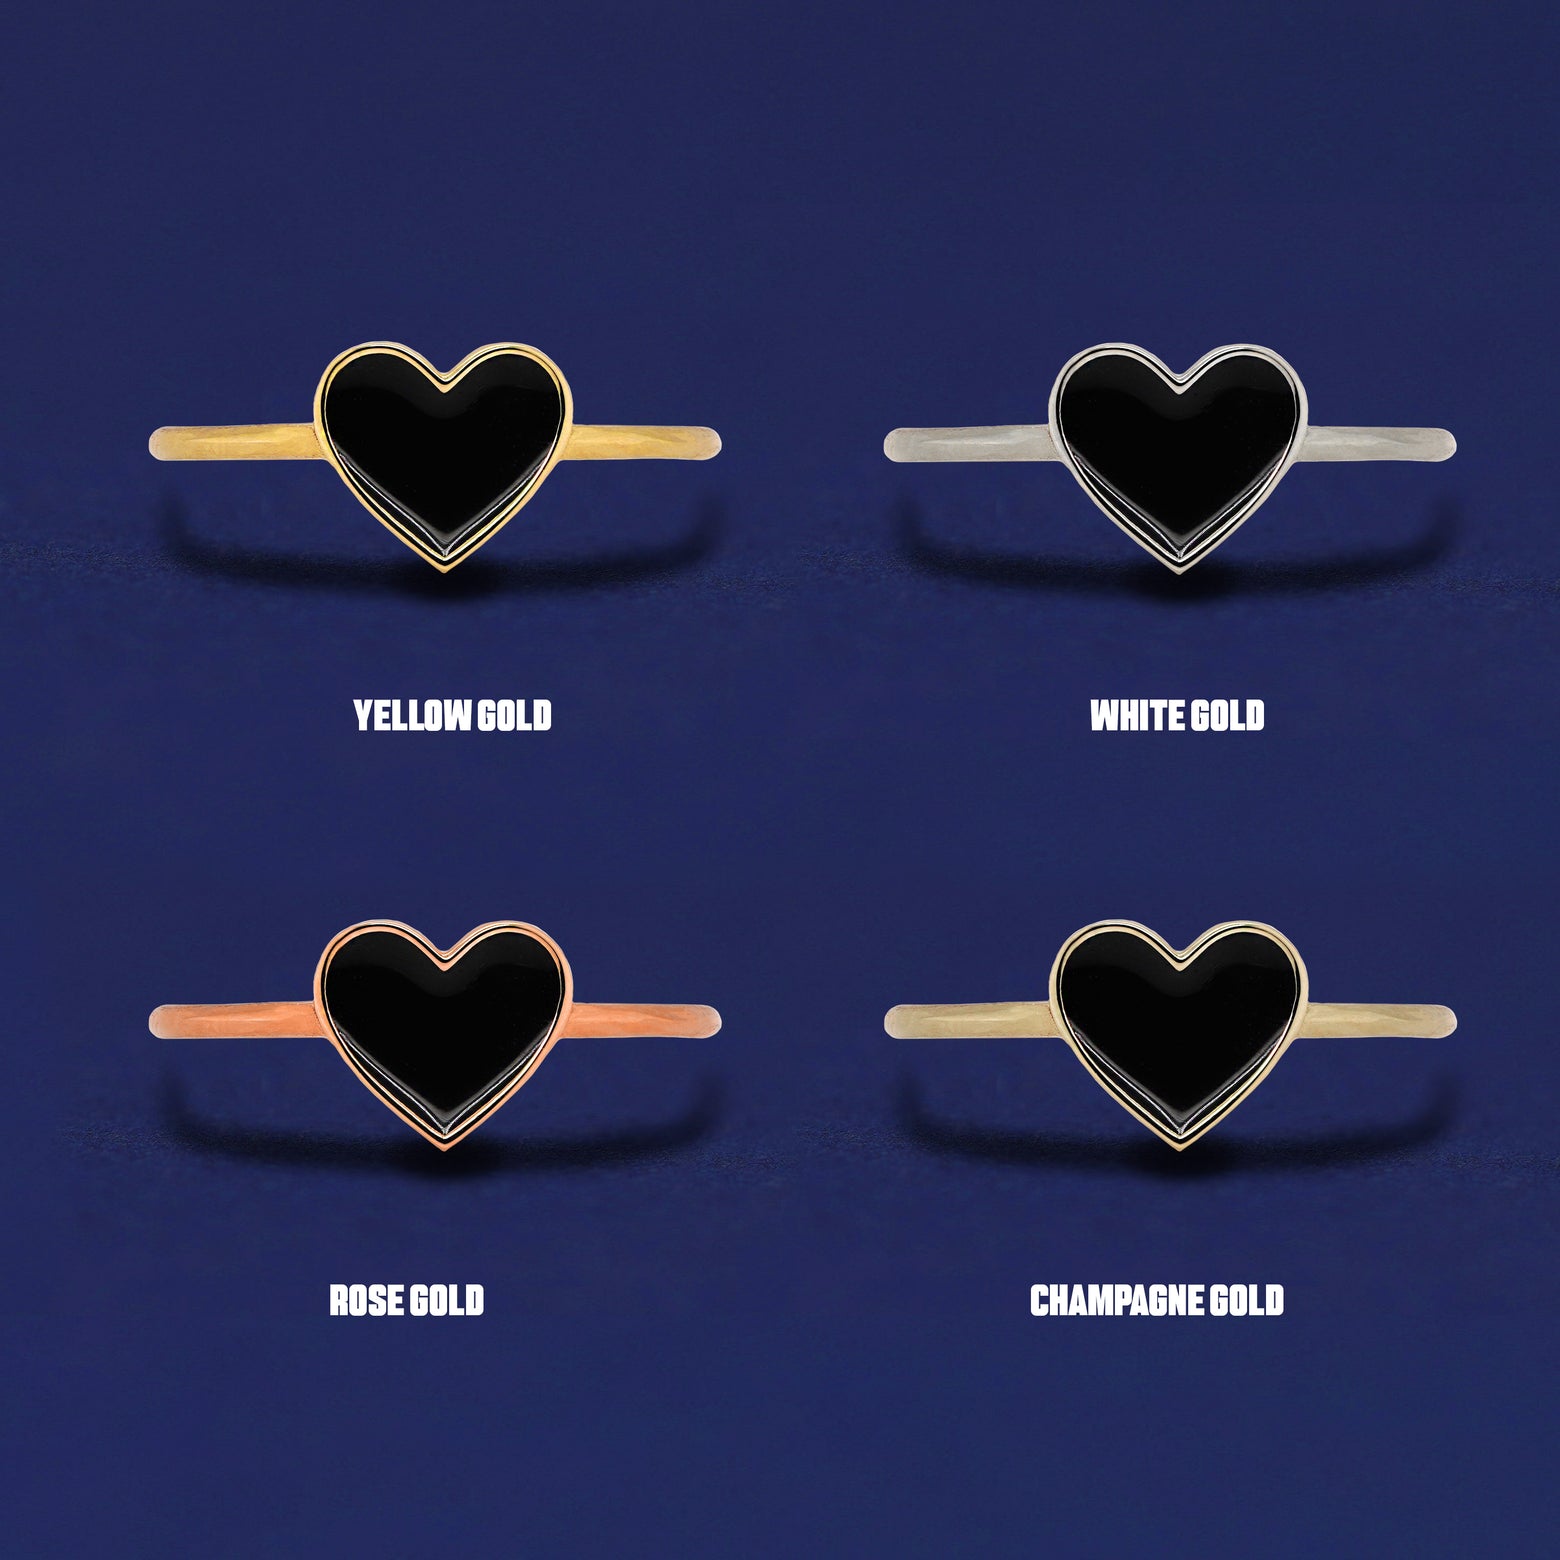 Four black enamel heart rings shown in options of yellow, white, rose, and champagne gold